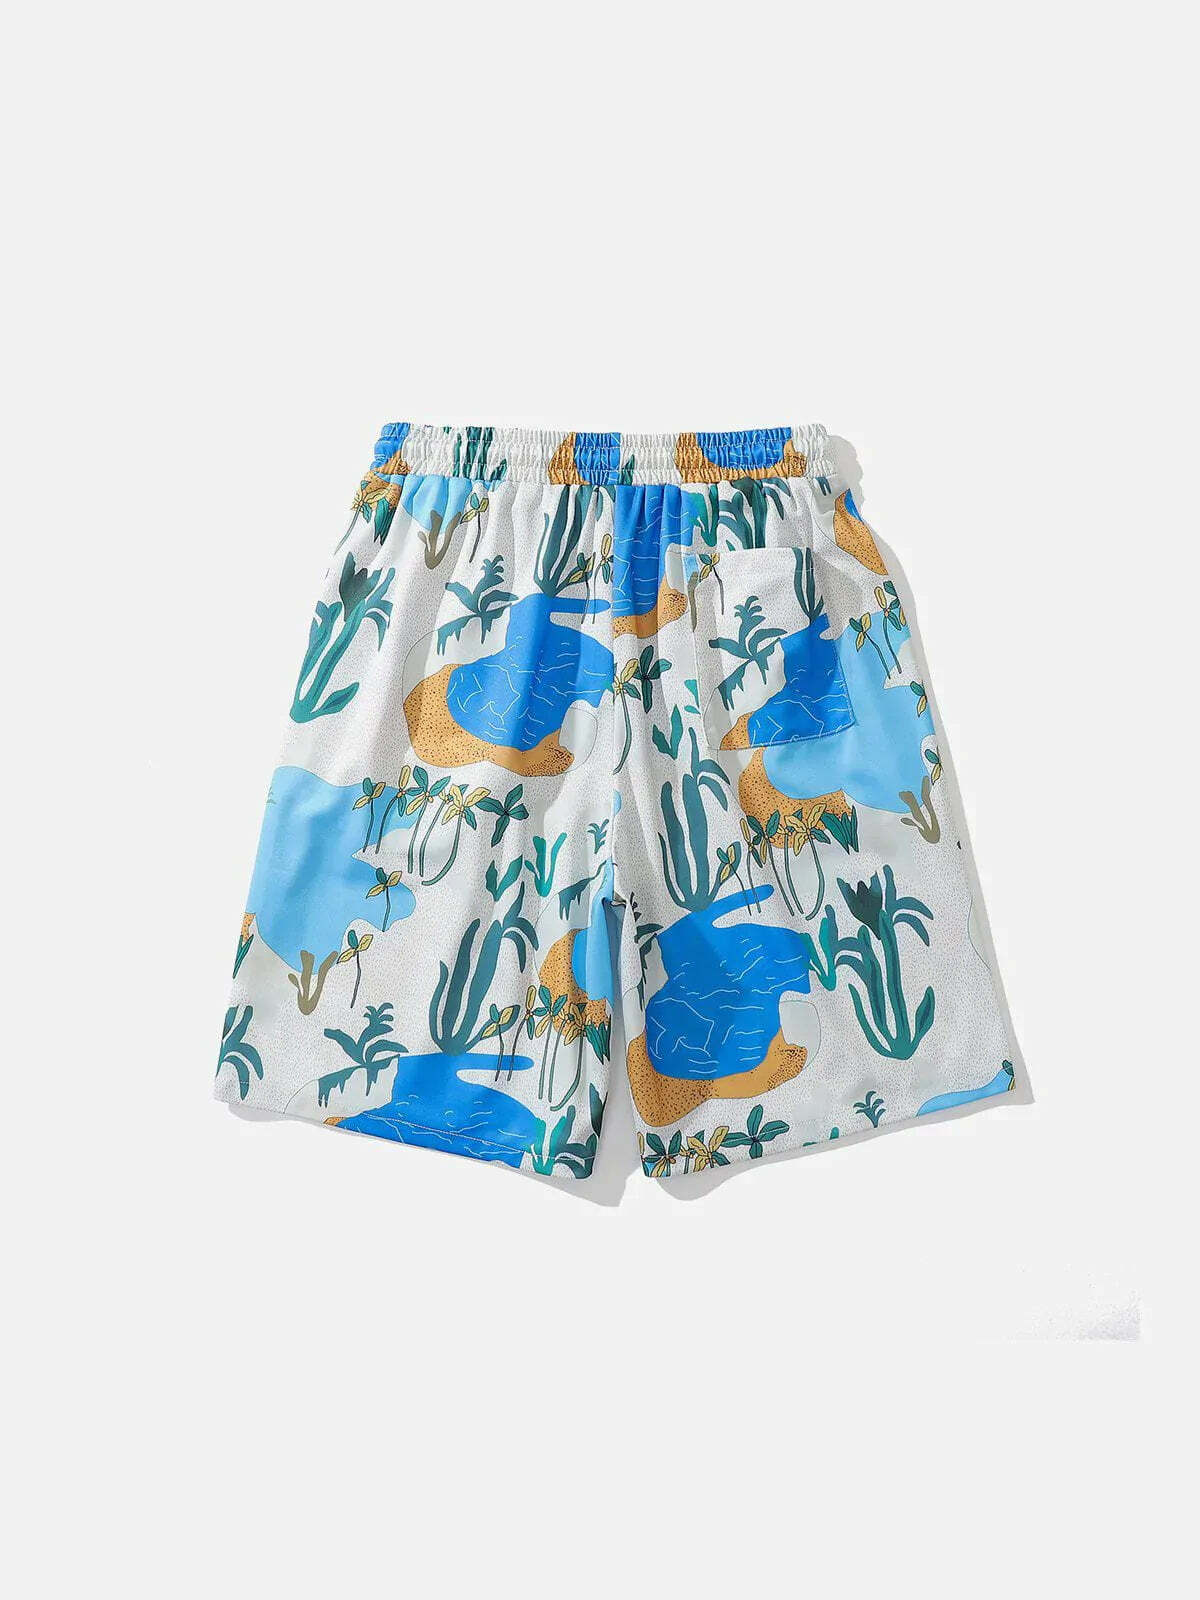 forestinspired sunrise print shorts nature meets y2k style 5462